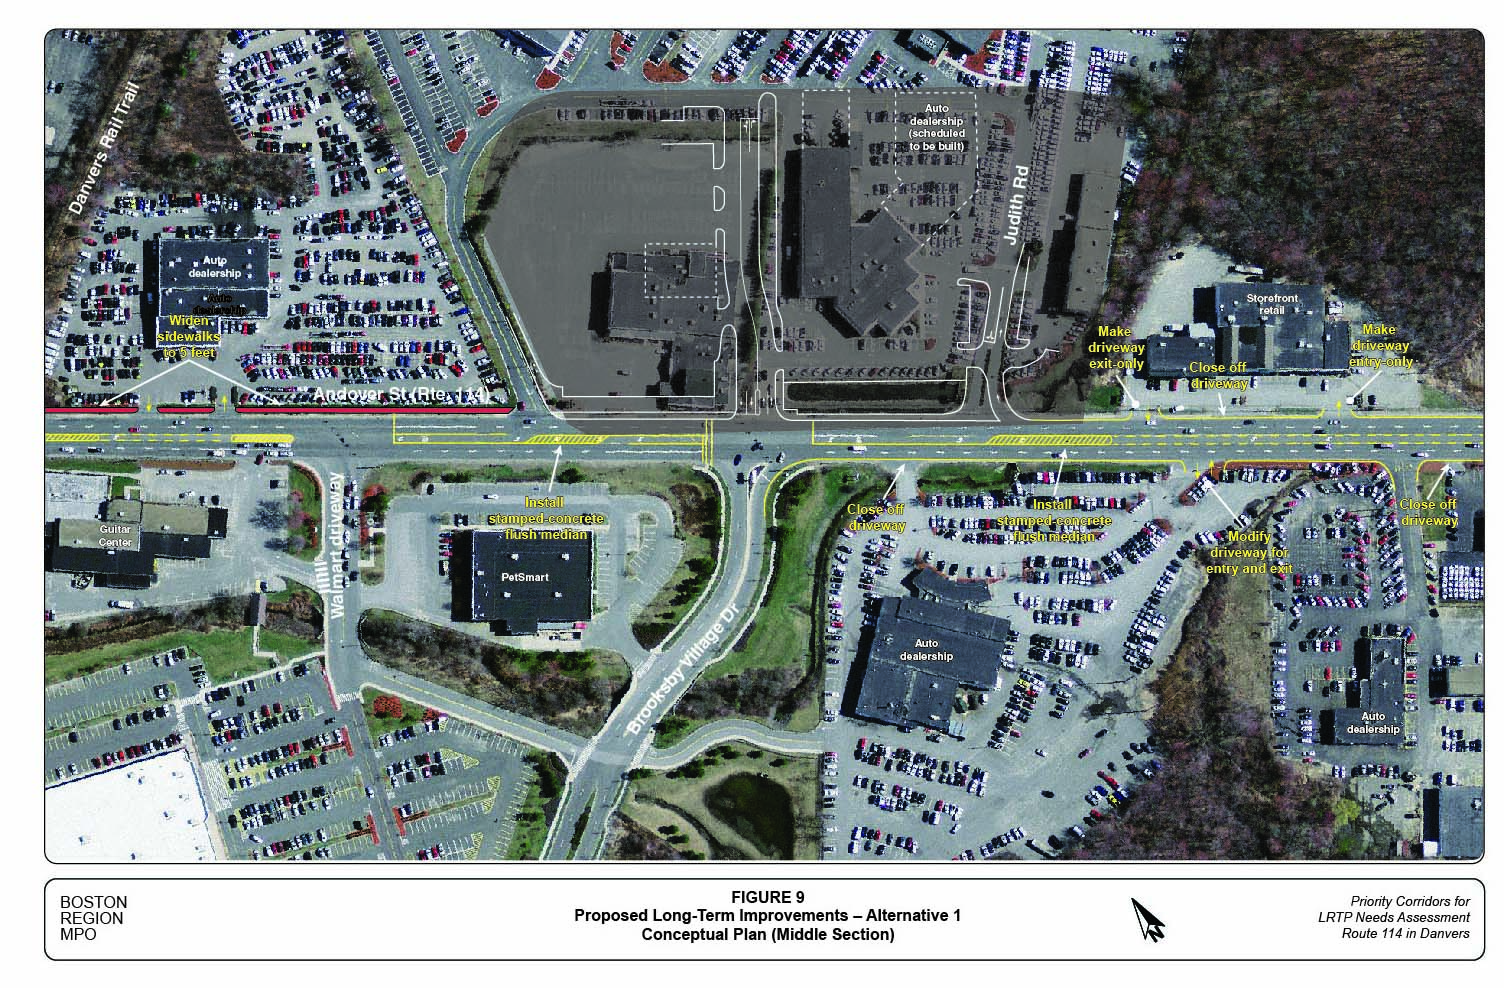 alt="Figure 9 shows the locations and layouts of the proposed long-term improvements in Alternative 1 in the middle section of the study corridor."